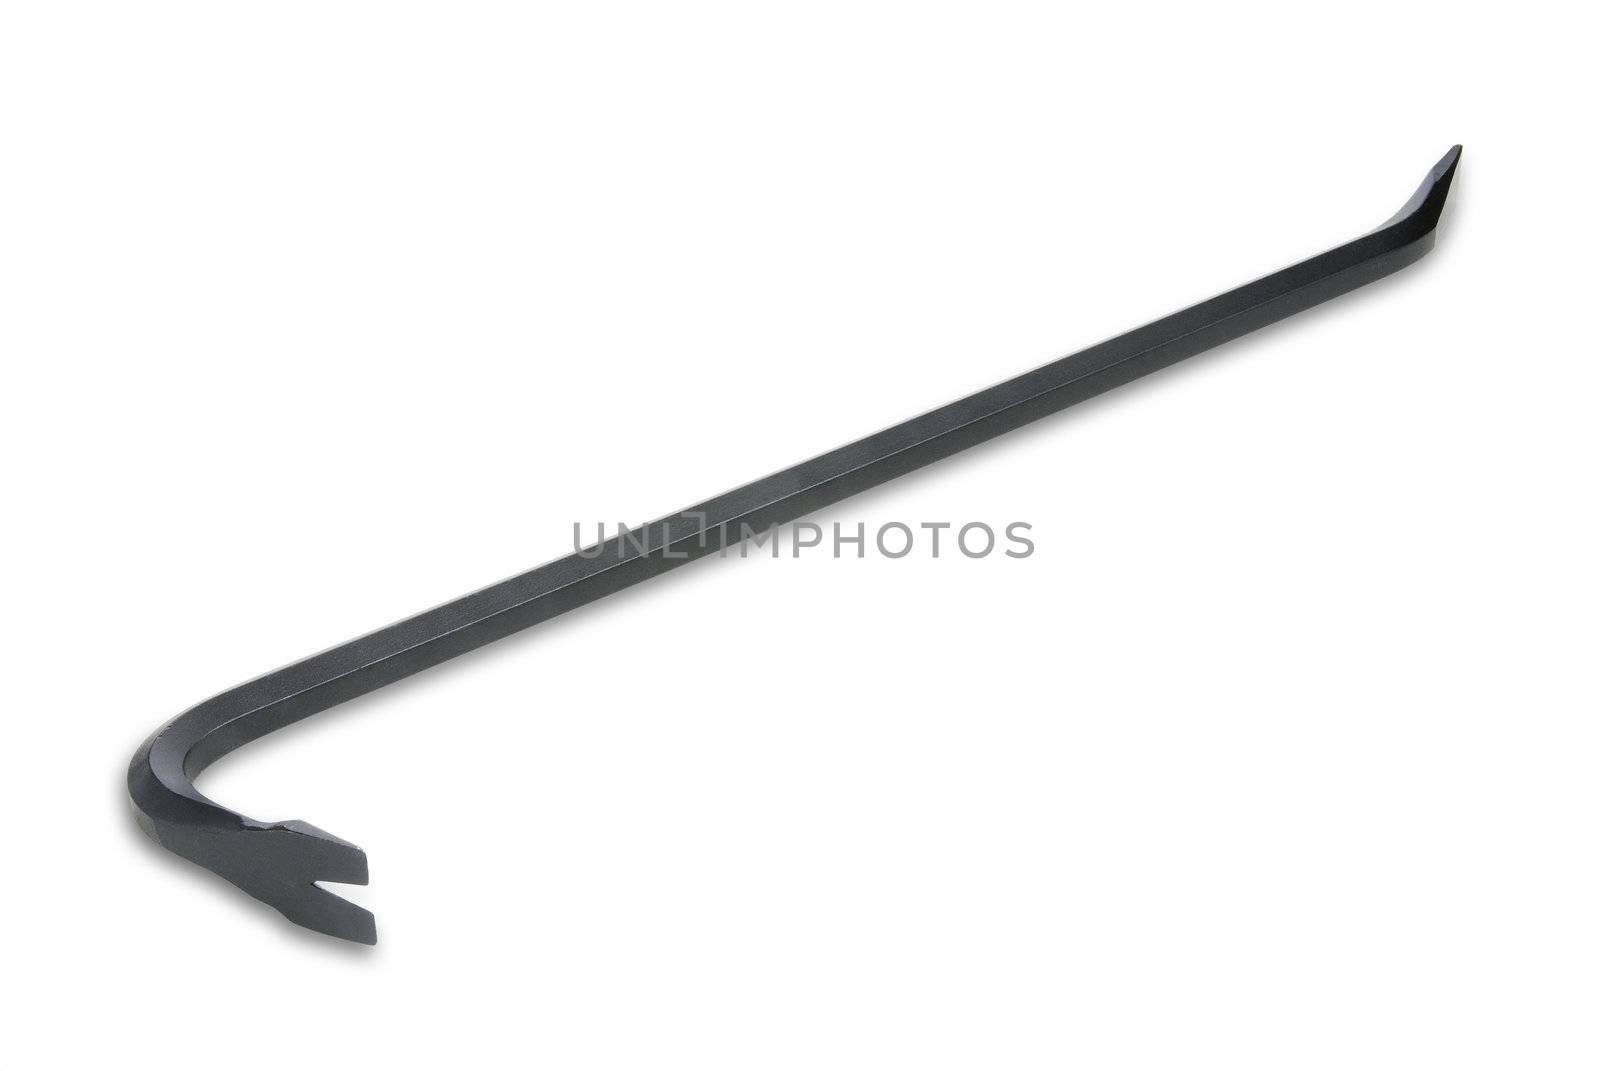 Crowbar on white with shadow isolated with clipping path